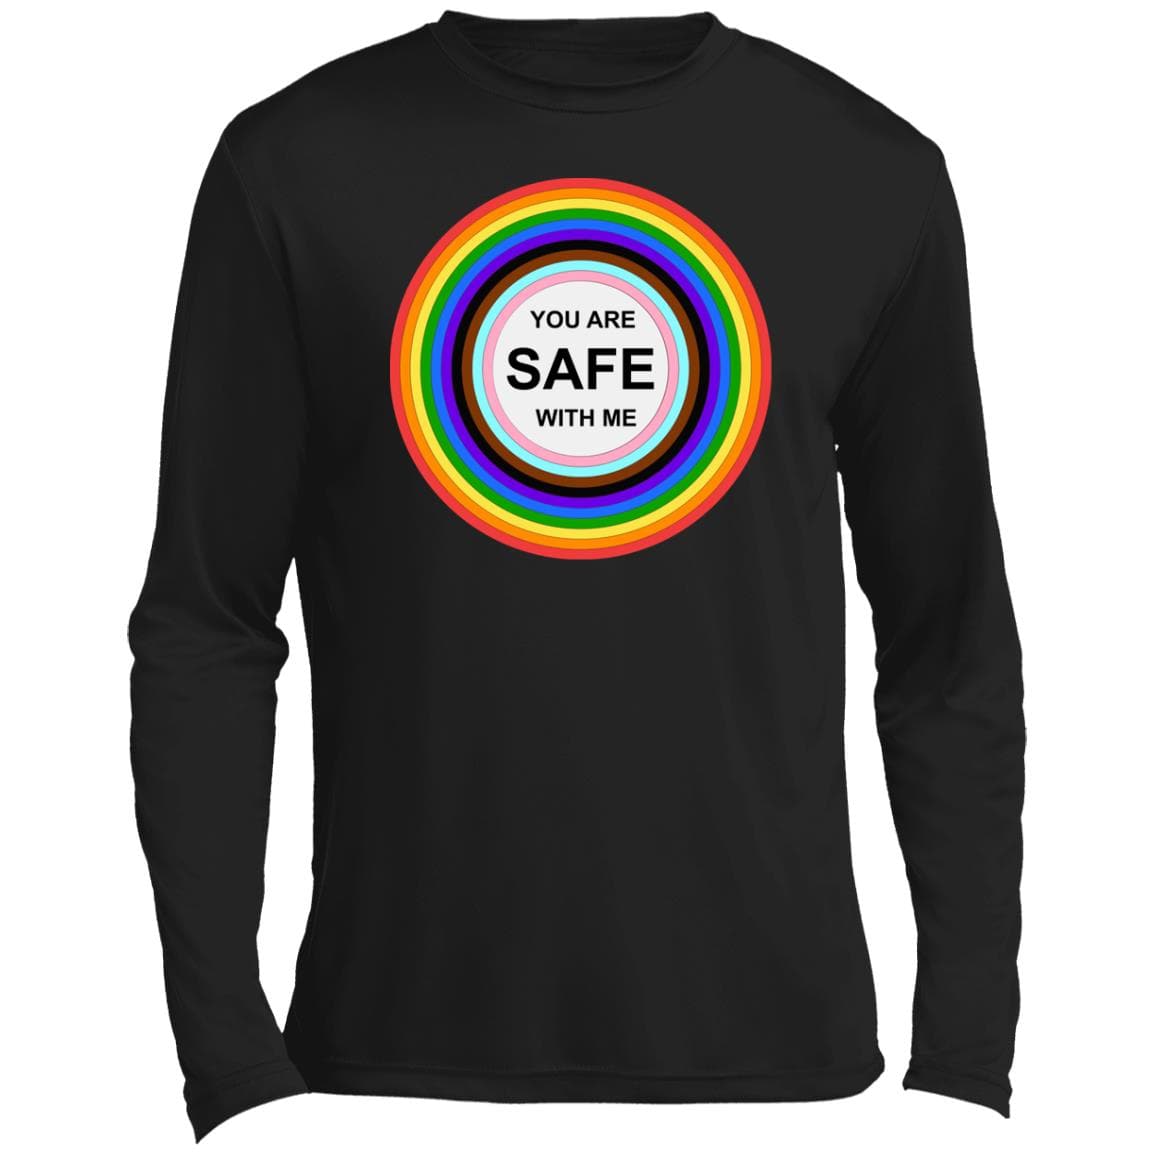 You are safe with me - T shirt & Hoodie - PrideBooth